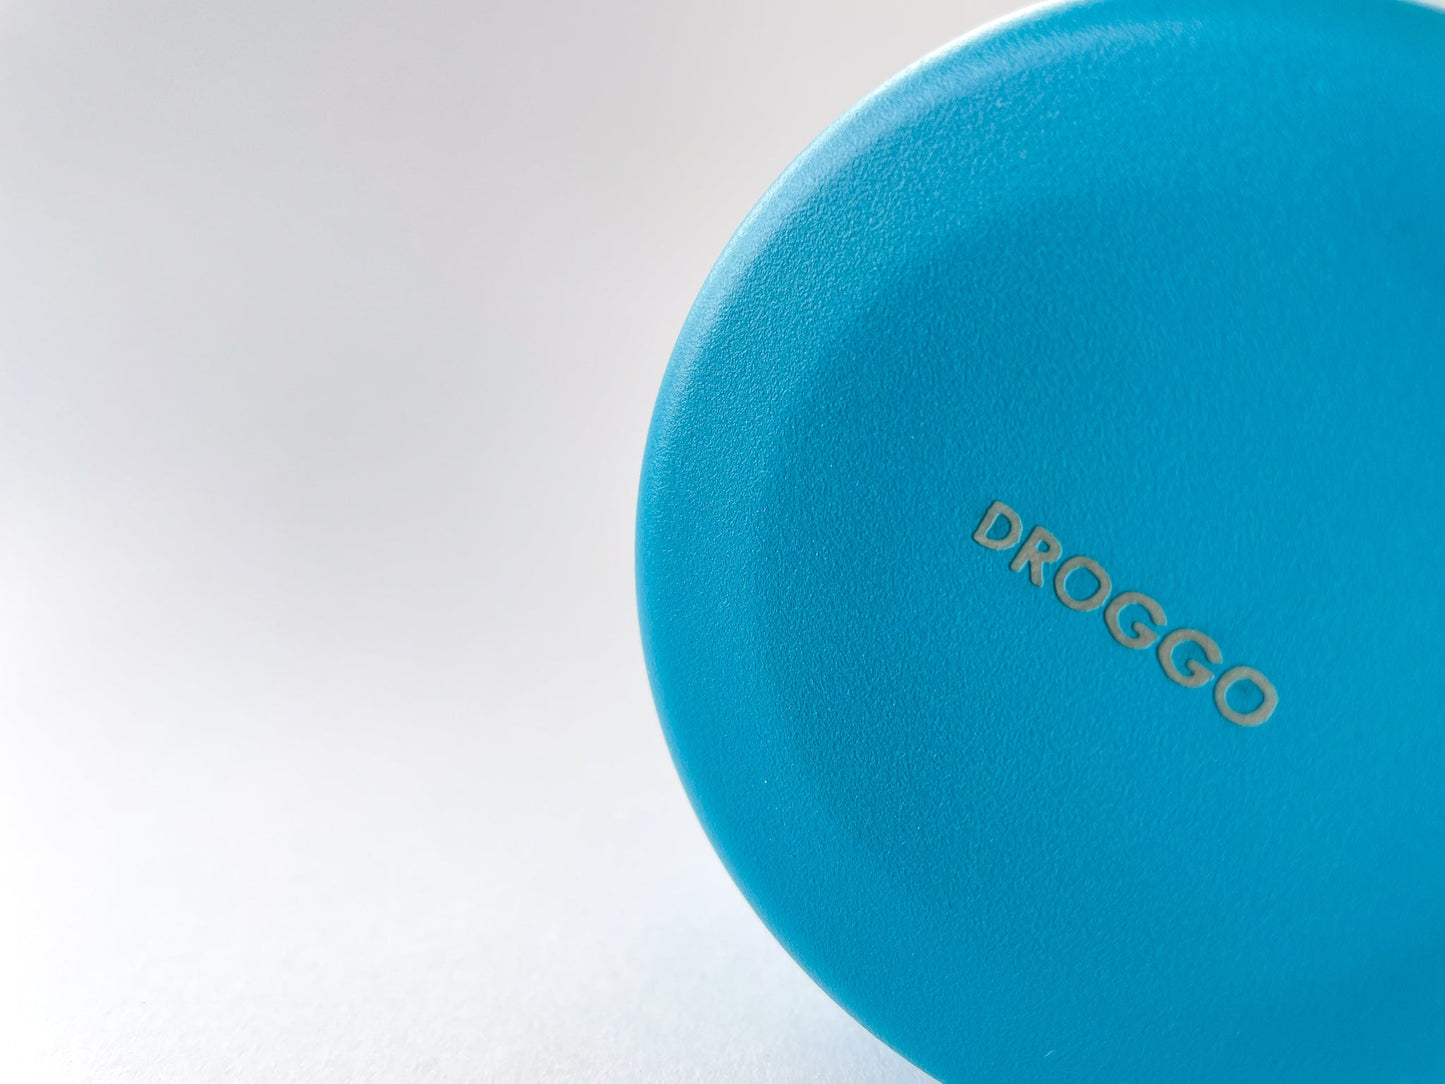 Detail of the Droggo logo at the bottom of the lake water bottle. White background.